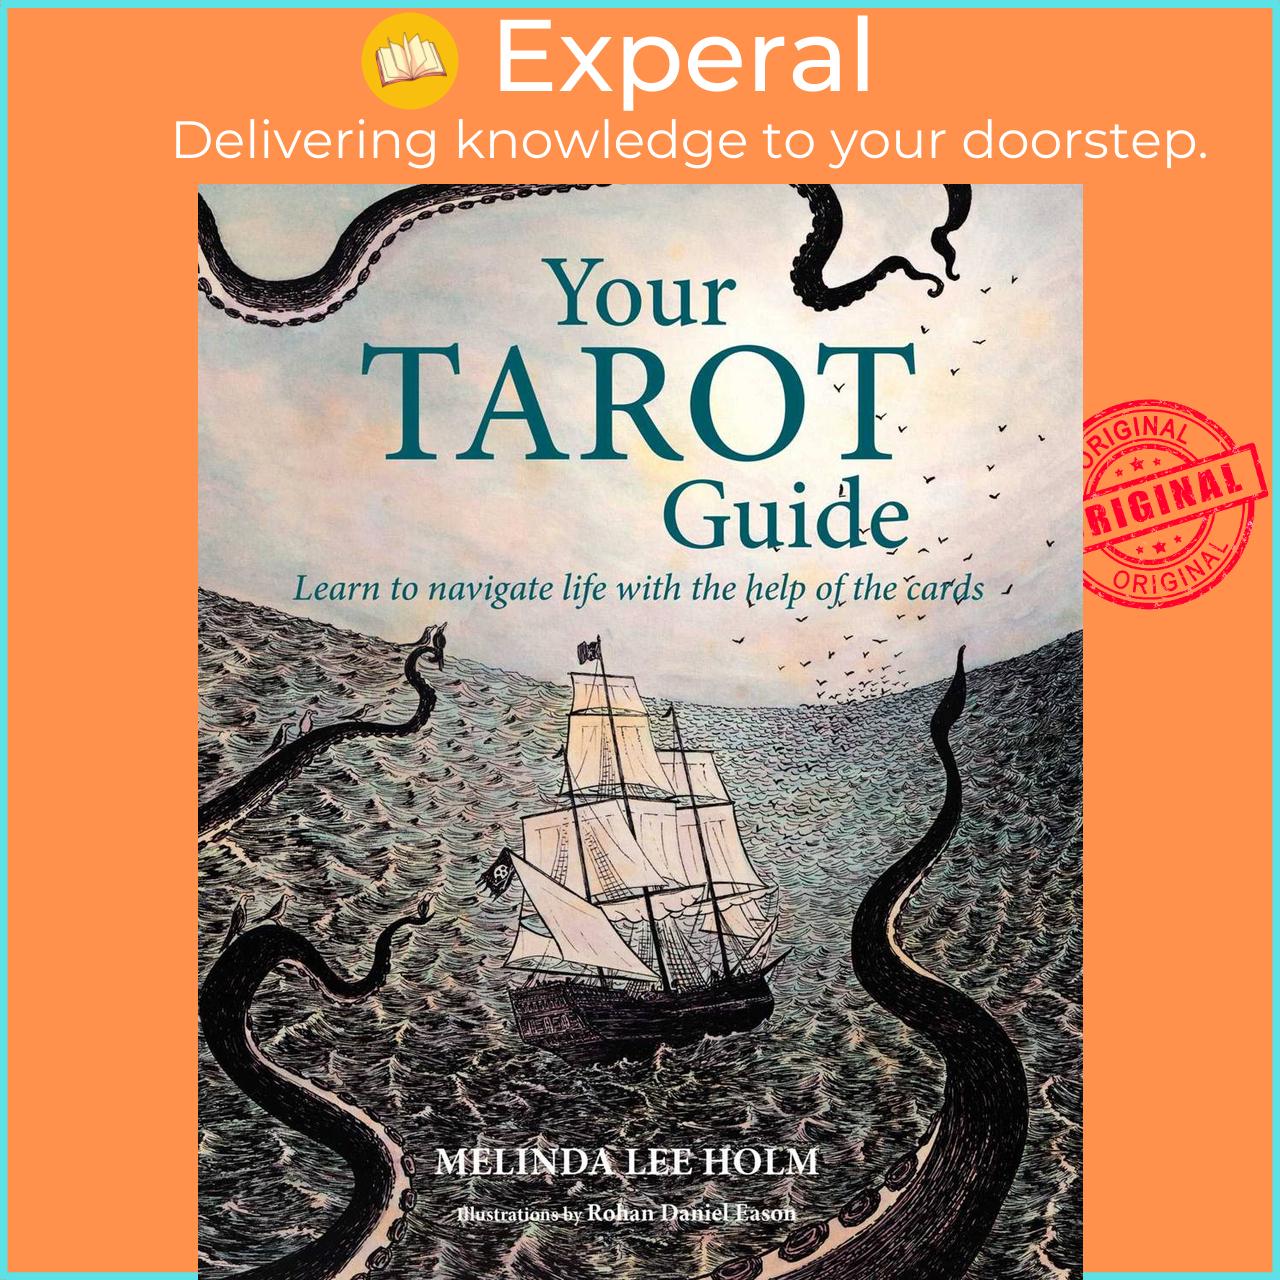 Hình ảnh Sách - Your Tarot Guide - Learn to navigate life with the help of the cards by Melinda Lee Holm (US edition, paperback)